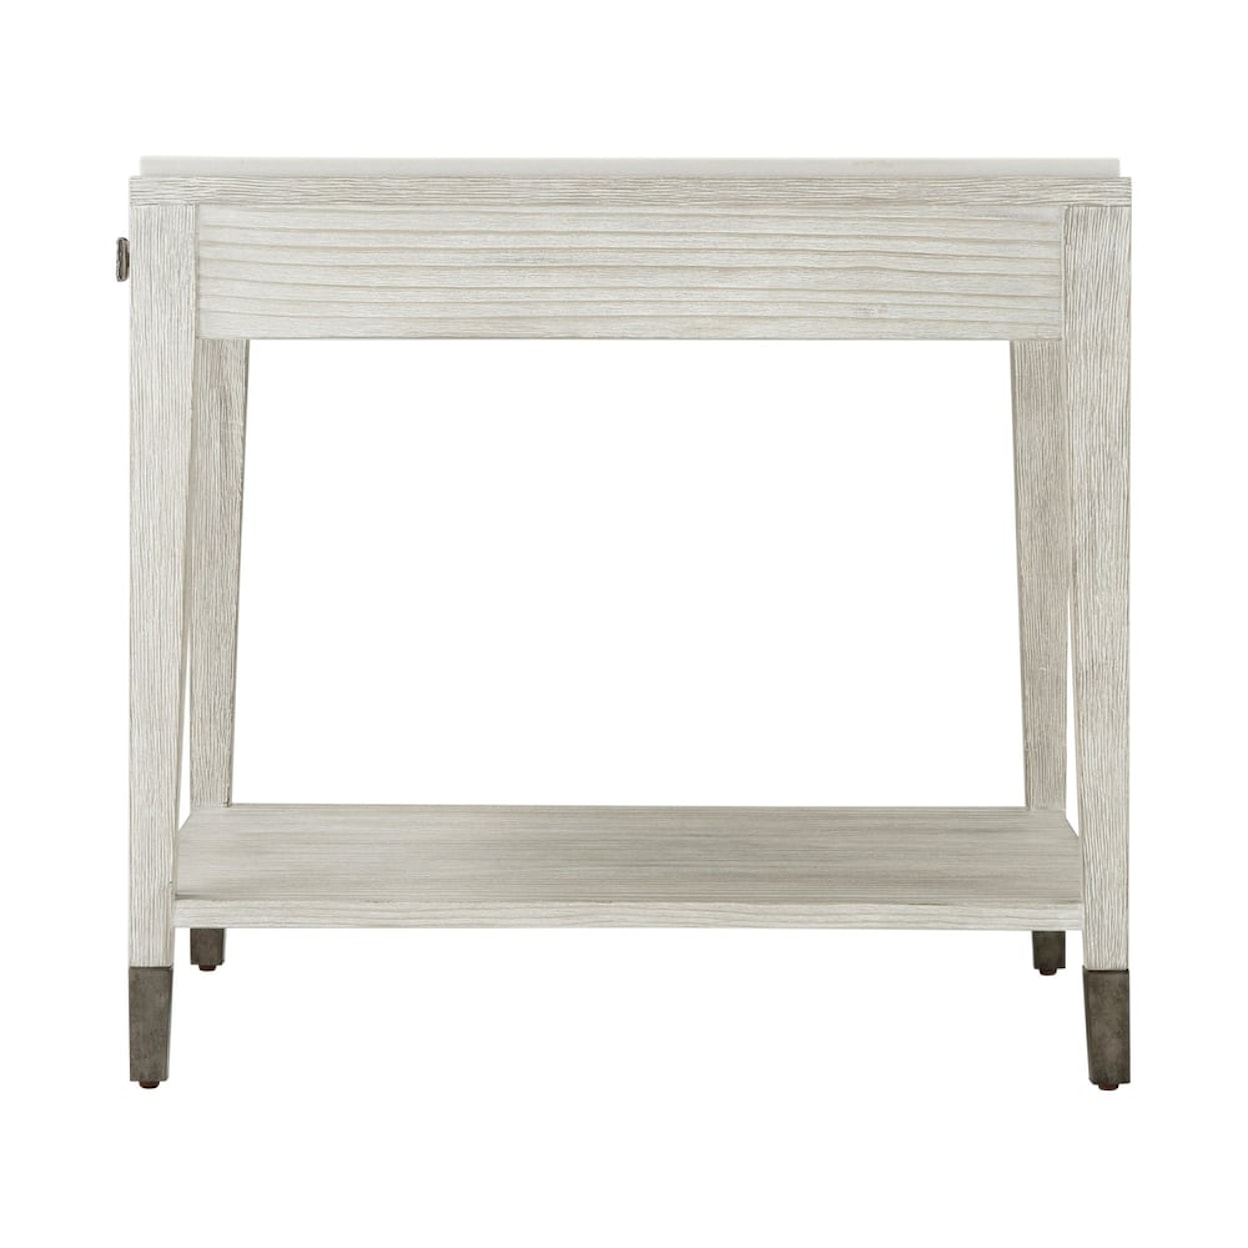 Theodore Alexander Breeze Pine Side Table with Storage